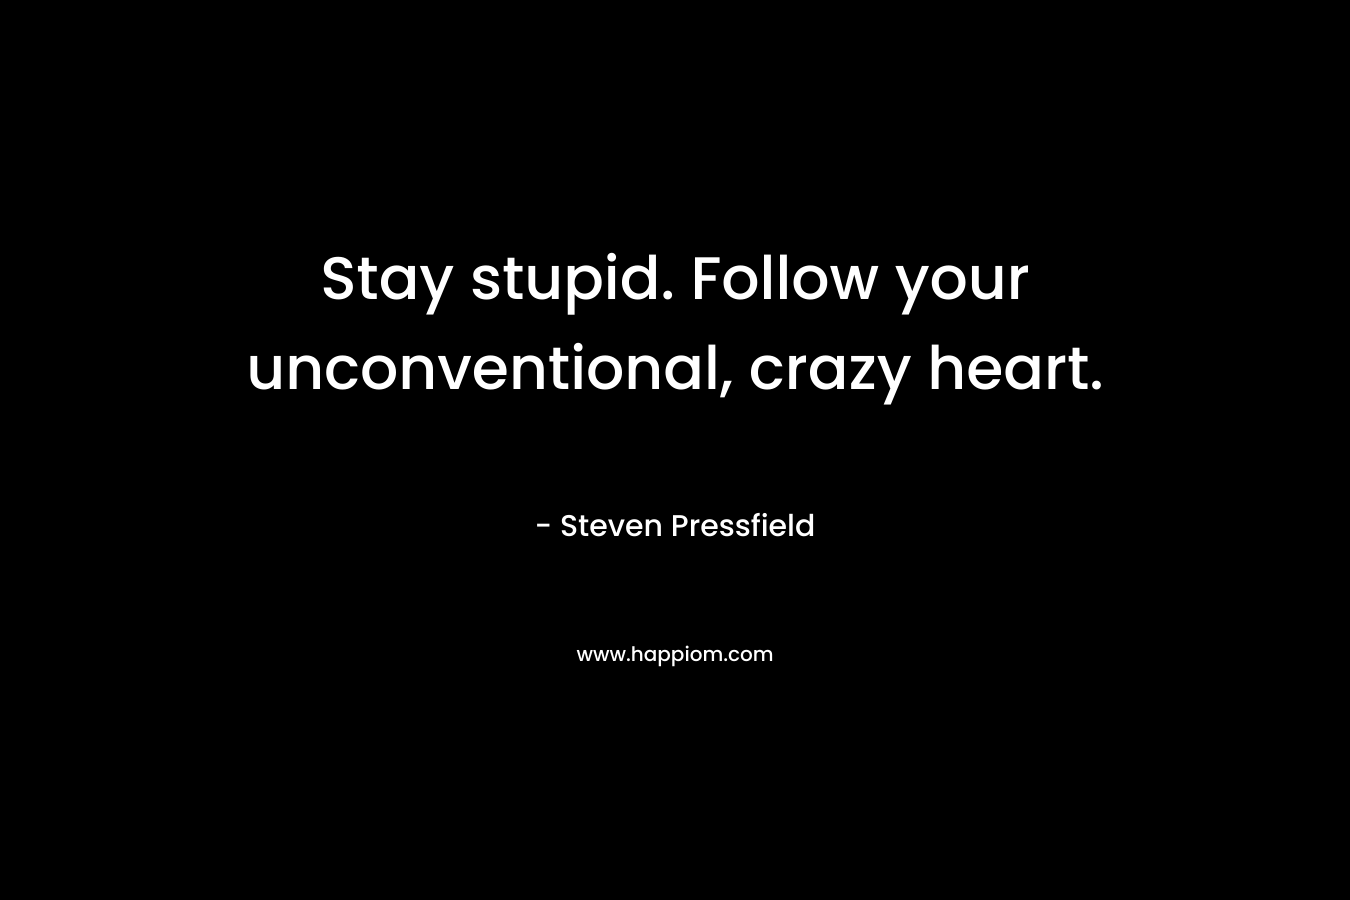 Stay stupid. Follow your unconventional, crazy heart.